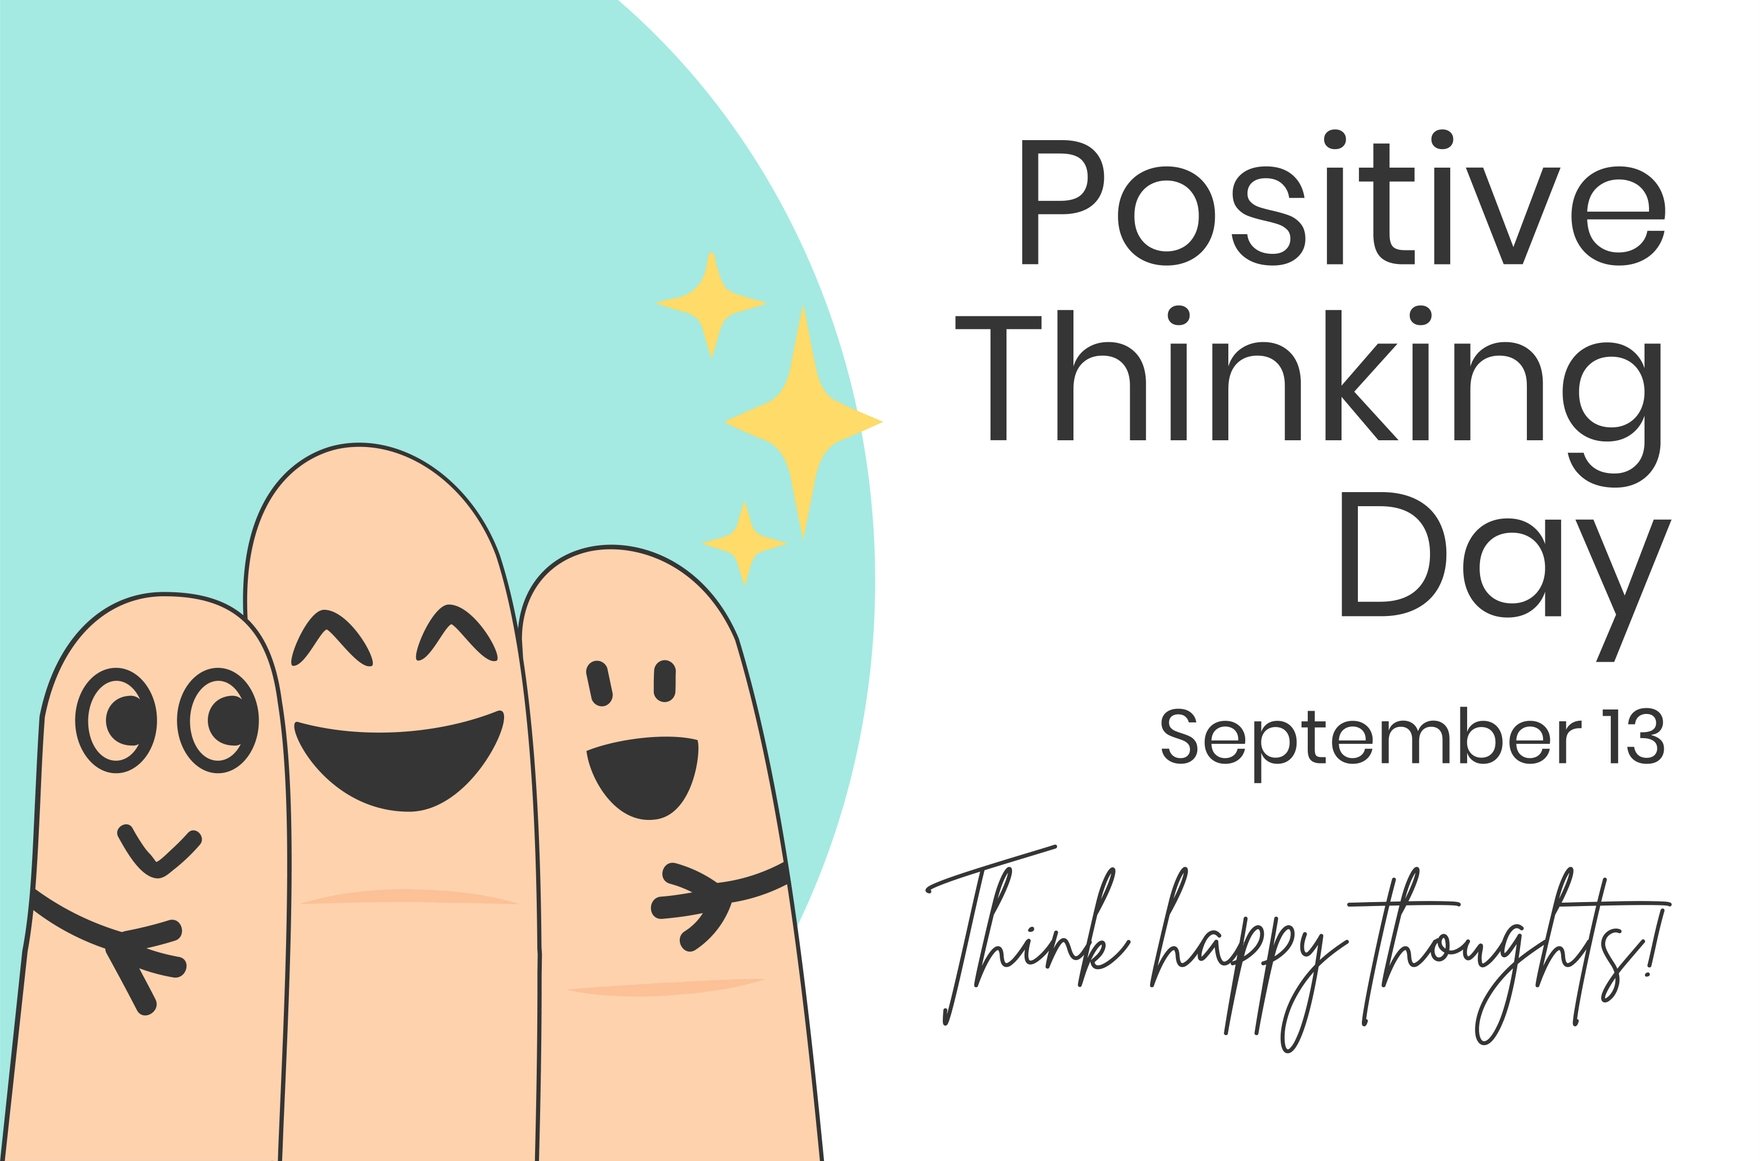 Free Positive Thinking Day Banner in Illustrator, PSD, EPS, SVG, JPG, PNG